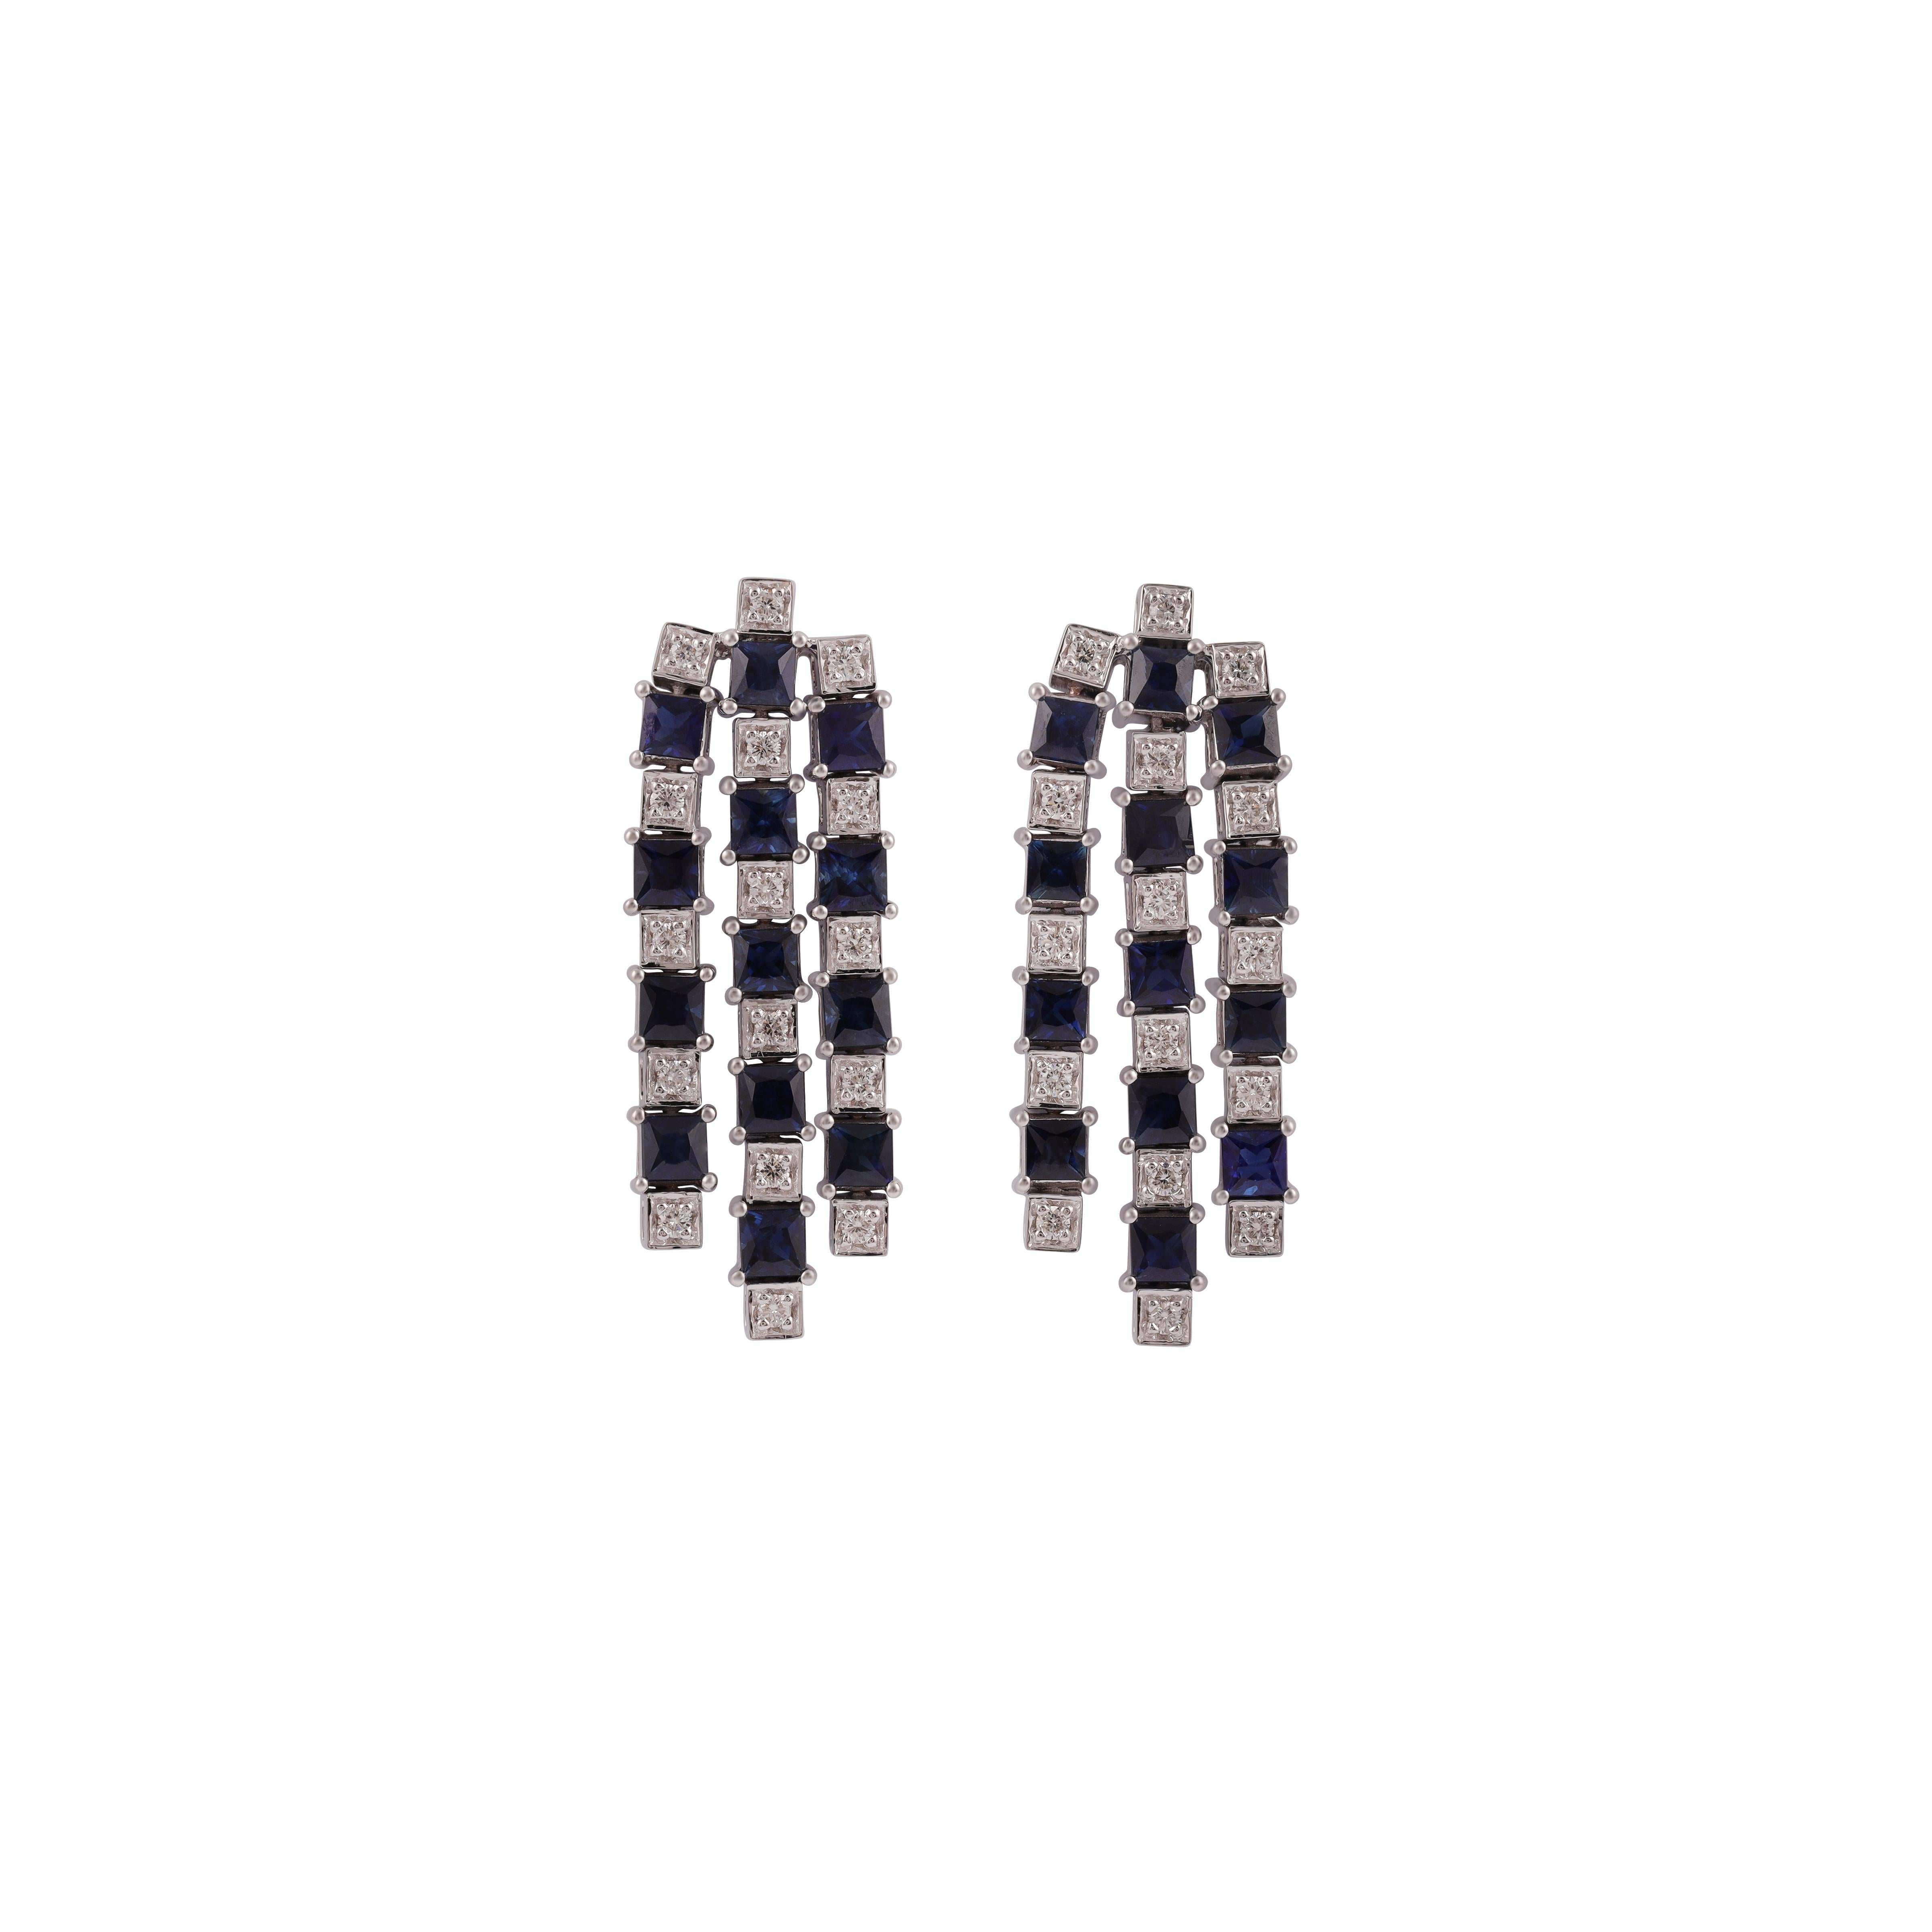 A once in a lifetime pair of earrings...

Made with the highest quality natural diamonds. 18k solid gold.

These earrings are set with Round shaped diamonds weighing 0.54 carat and Blue Sapphire gemstone weighing 5.25 carat. The Round are of HI-SI